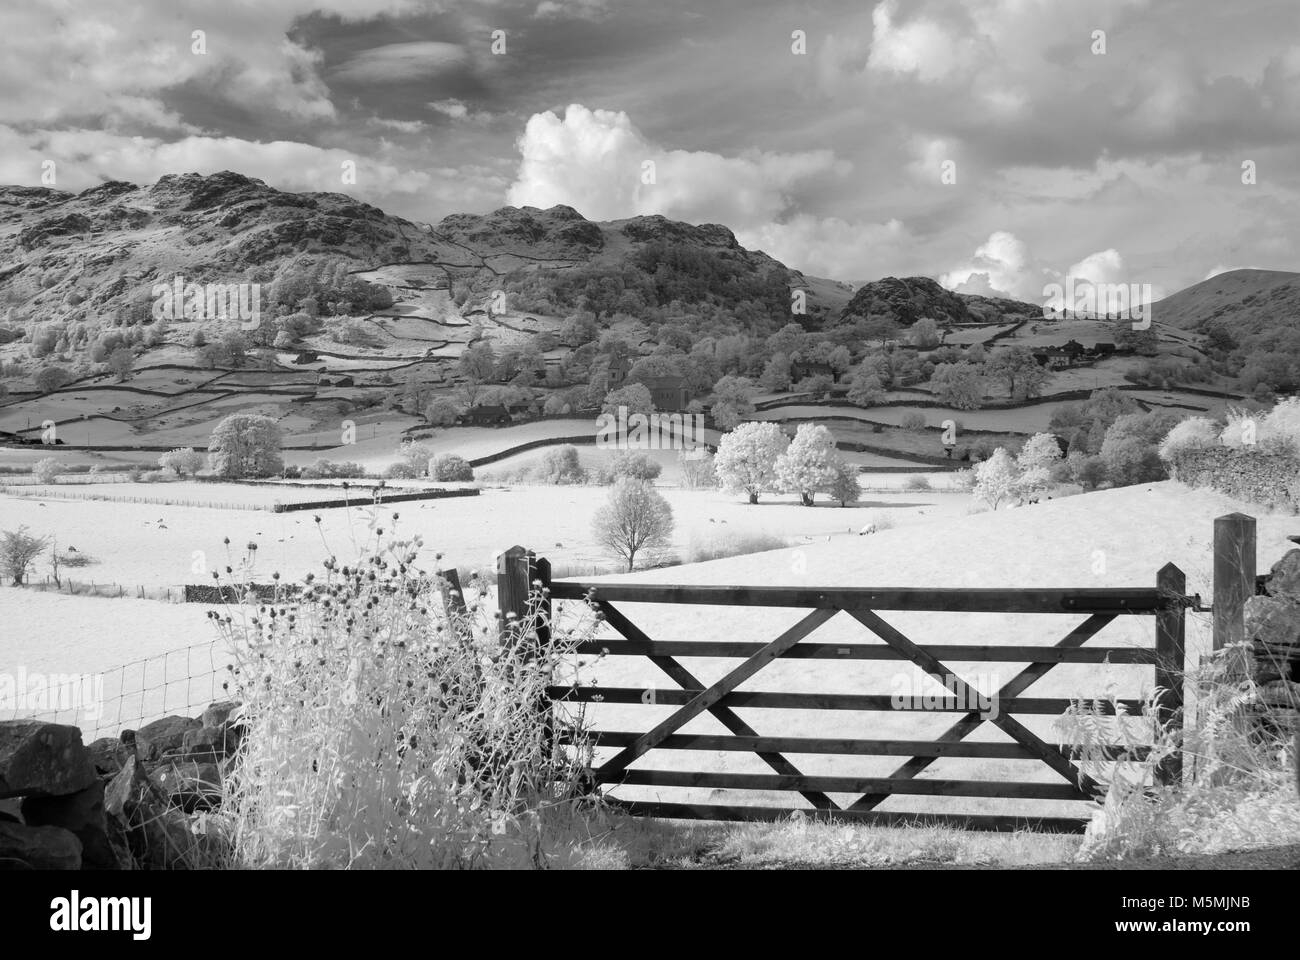 A location shoot of Kendall in the Lake District. Infra Red DSLR, Bright sunny day, Photographer Claire Allen. Beautiful Landscape Photography Stock Photo